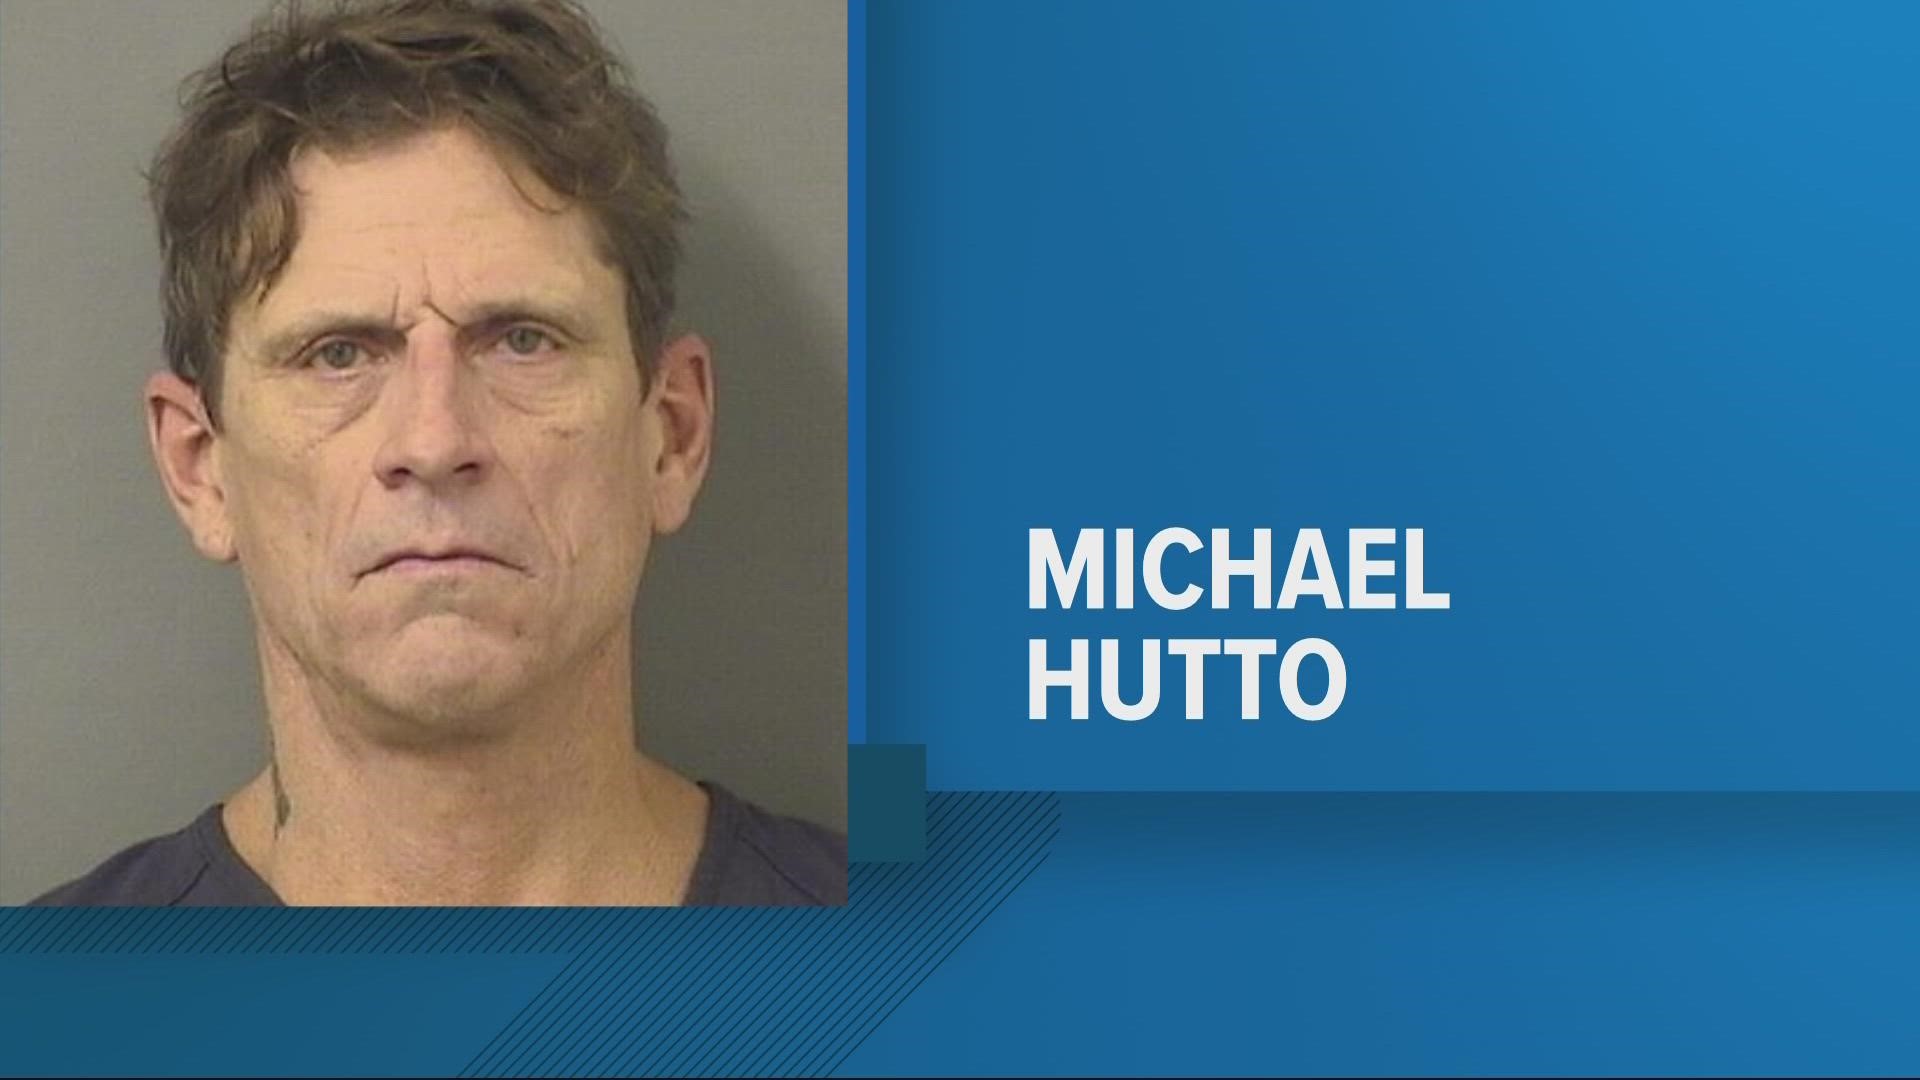 The state argued that Hutto should have his bond revoked after he was accused of stalking co-workers of the woman he is charged with killing.